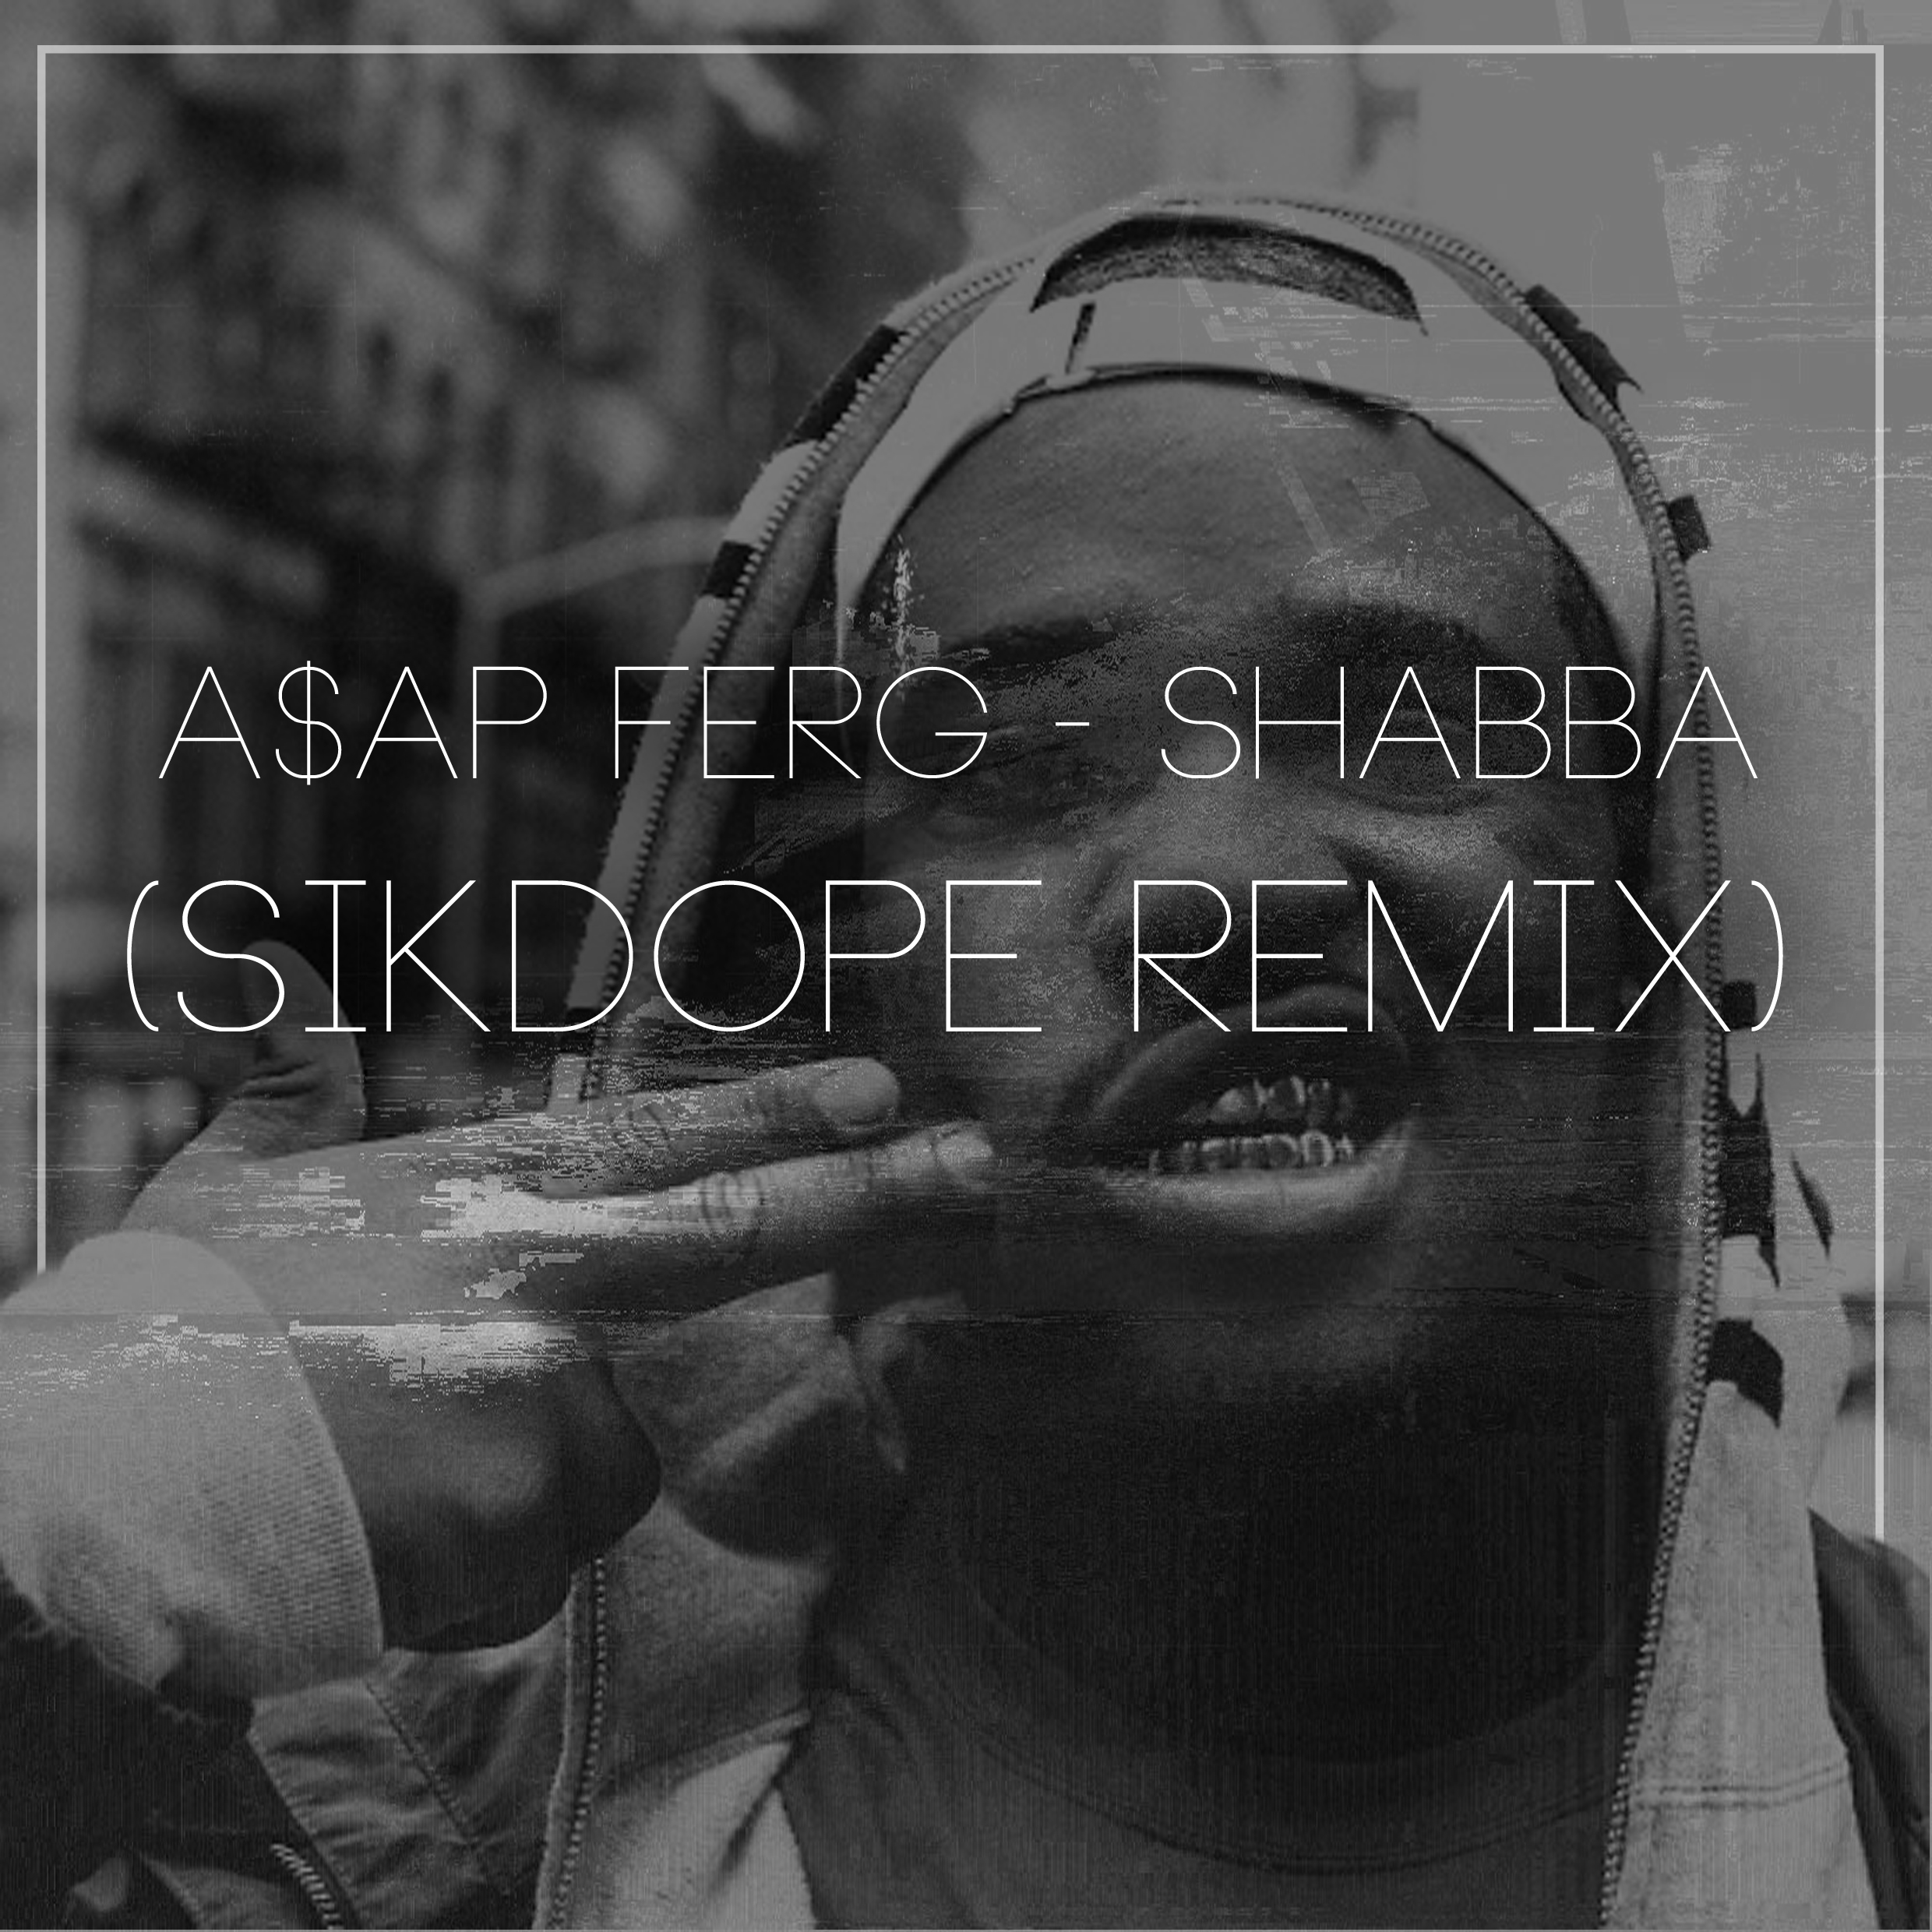 Art for Shabba ( Sikdope Remix ) by A$AP FERG